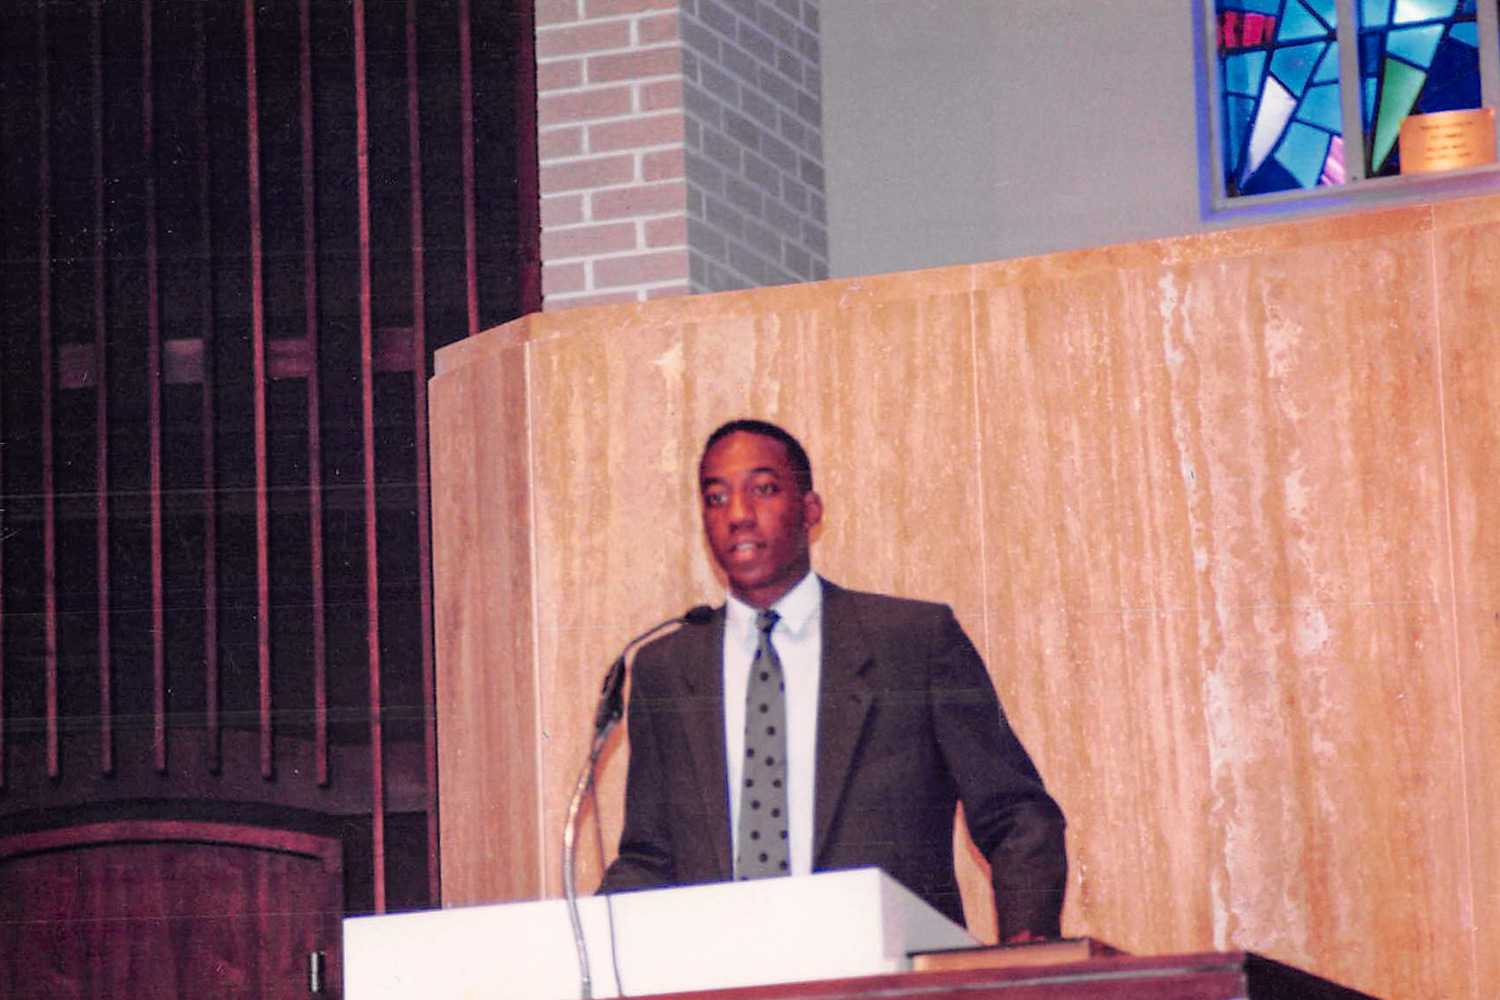 Warnock's early days as a young minister (Courtesy of Senator Raphael Warnock)